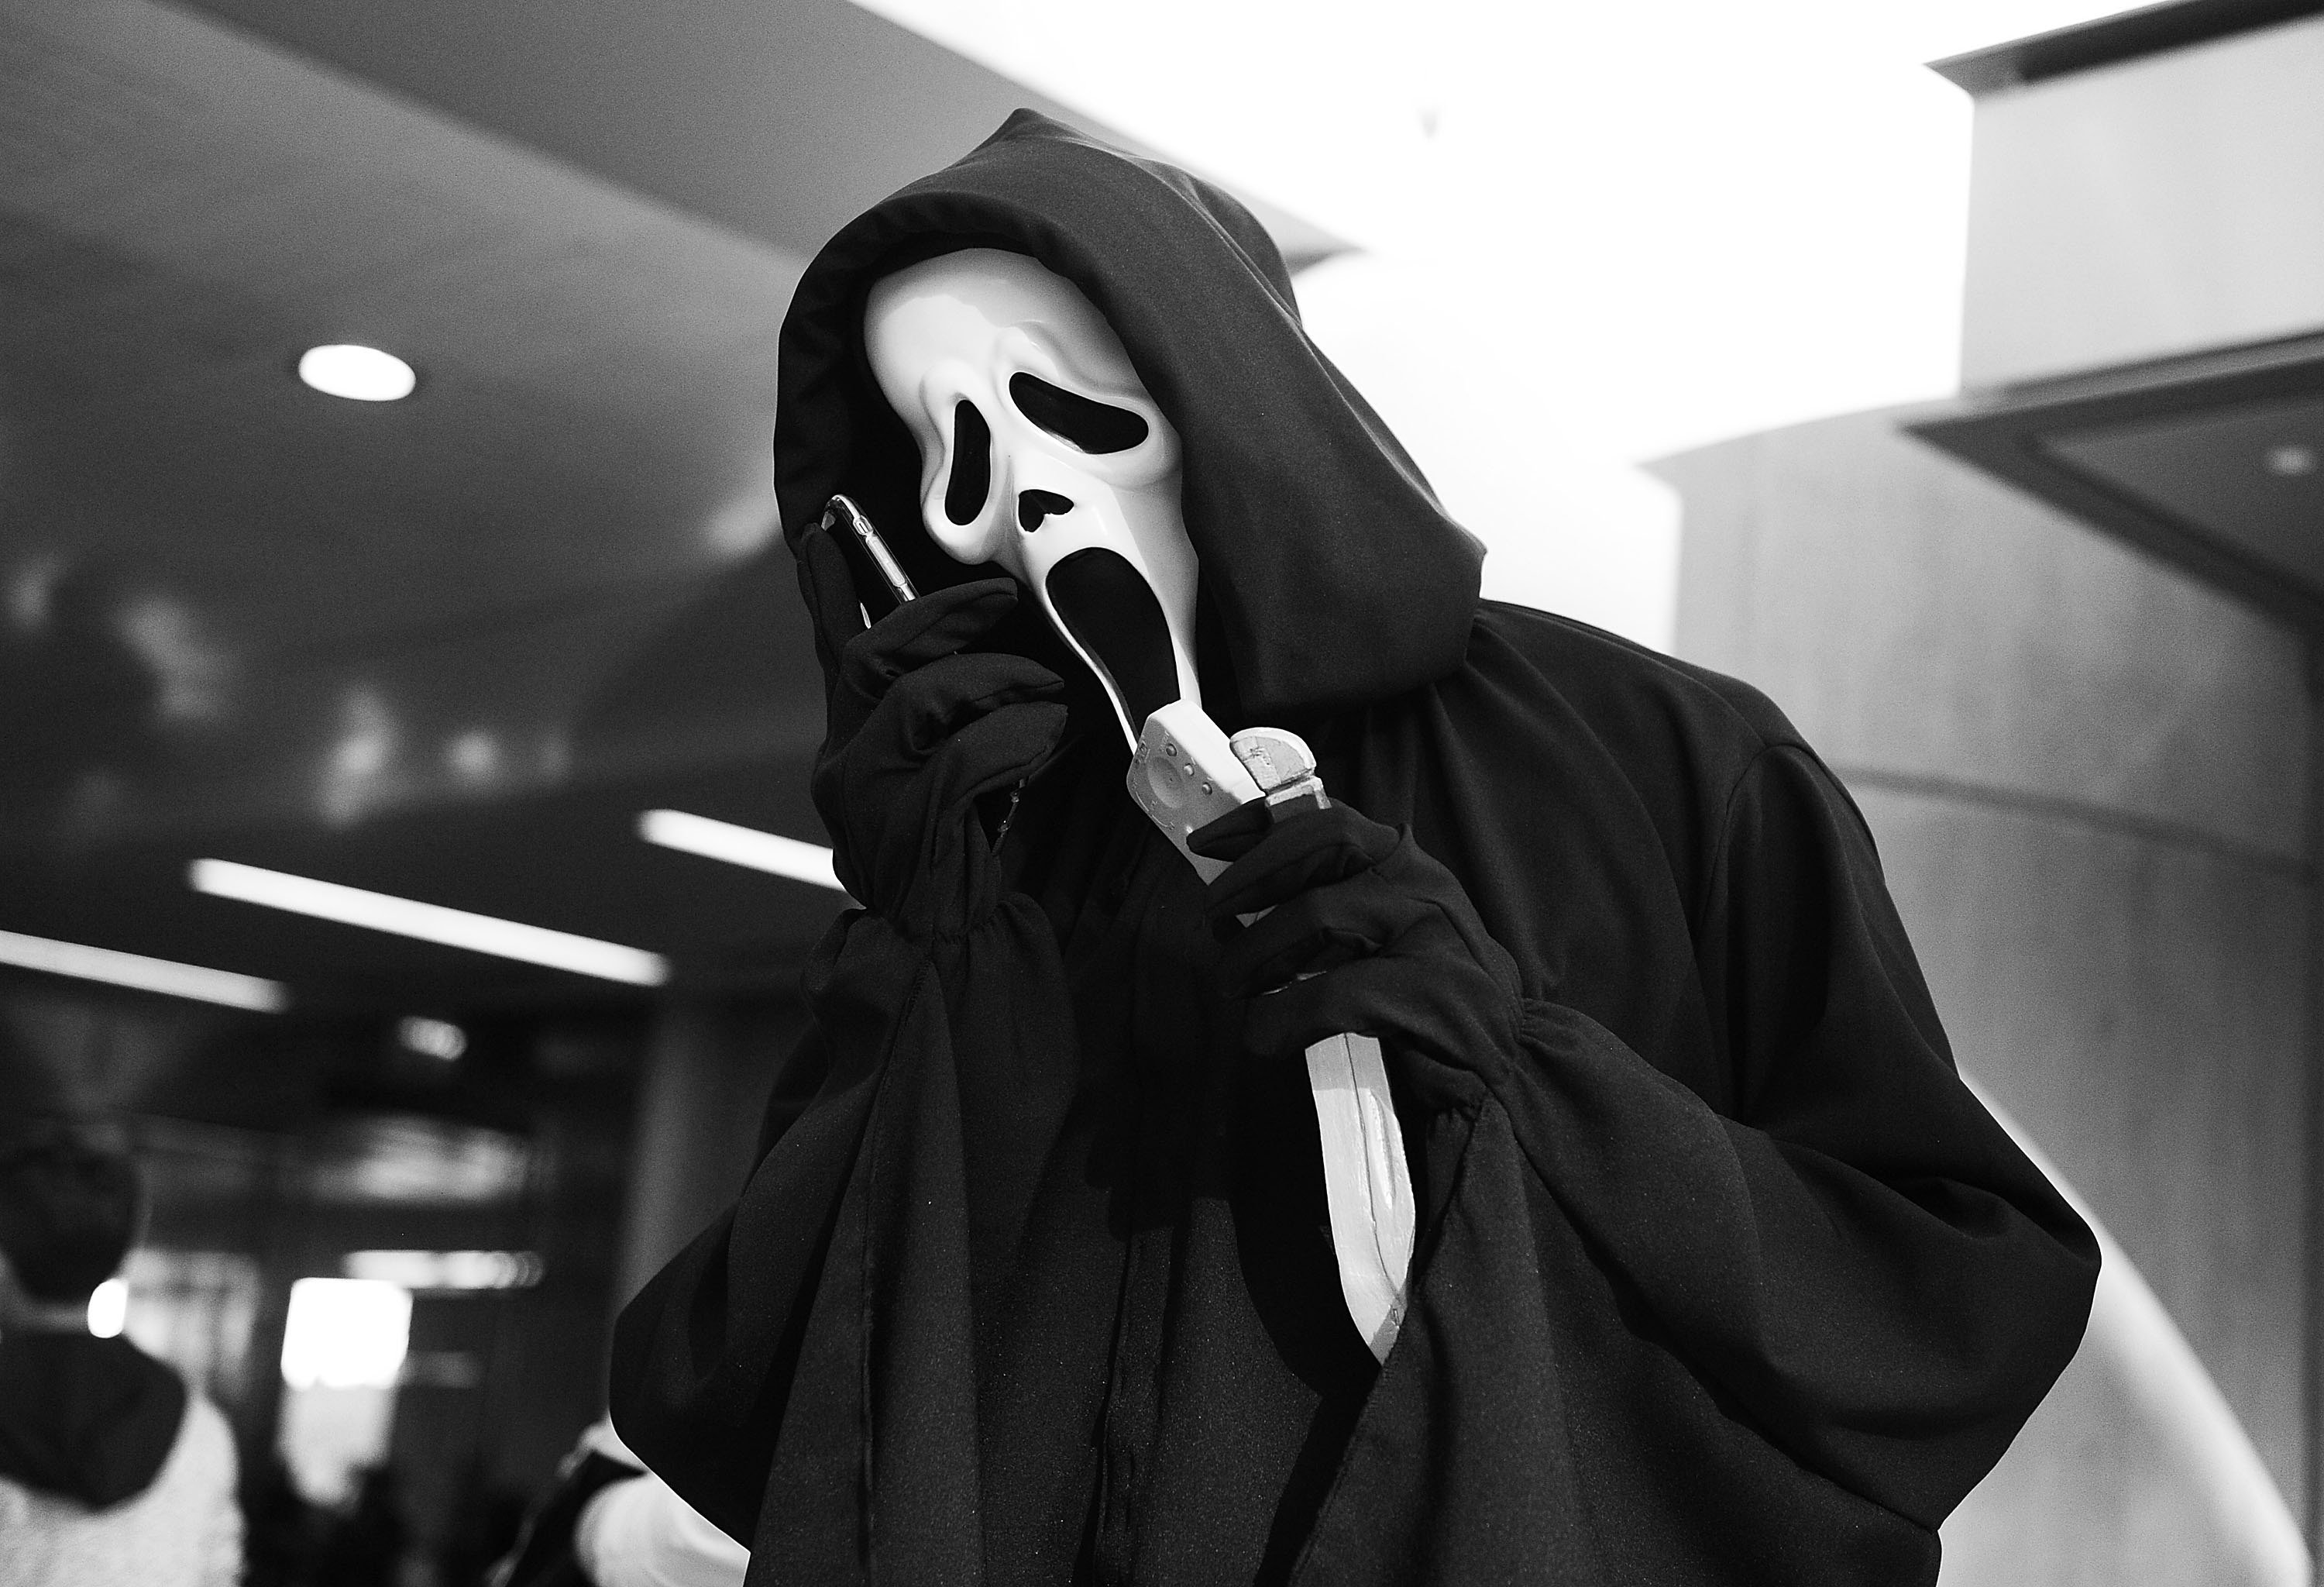 A Comic Con attendee in character as Ghostface from the Scream horror movie franchise